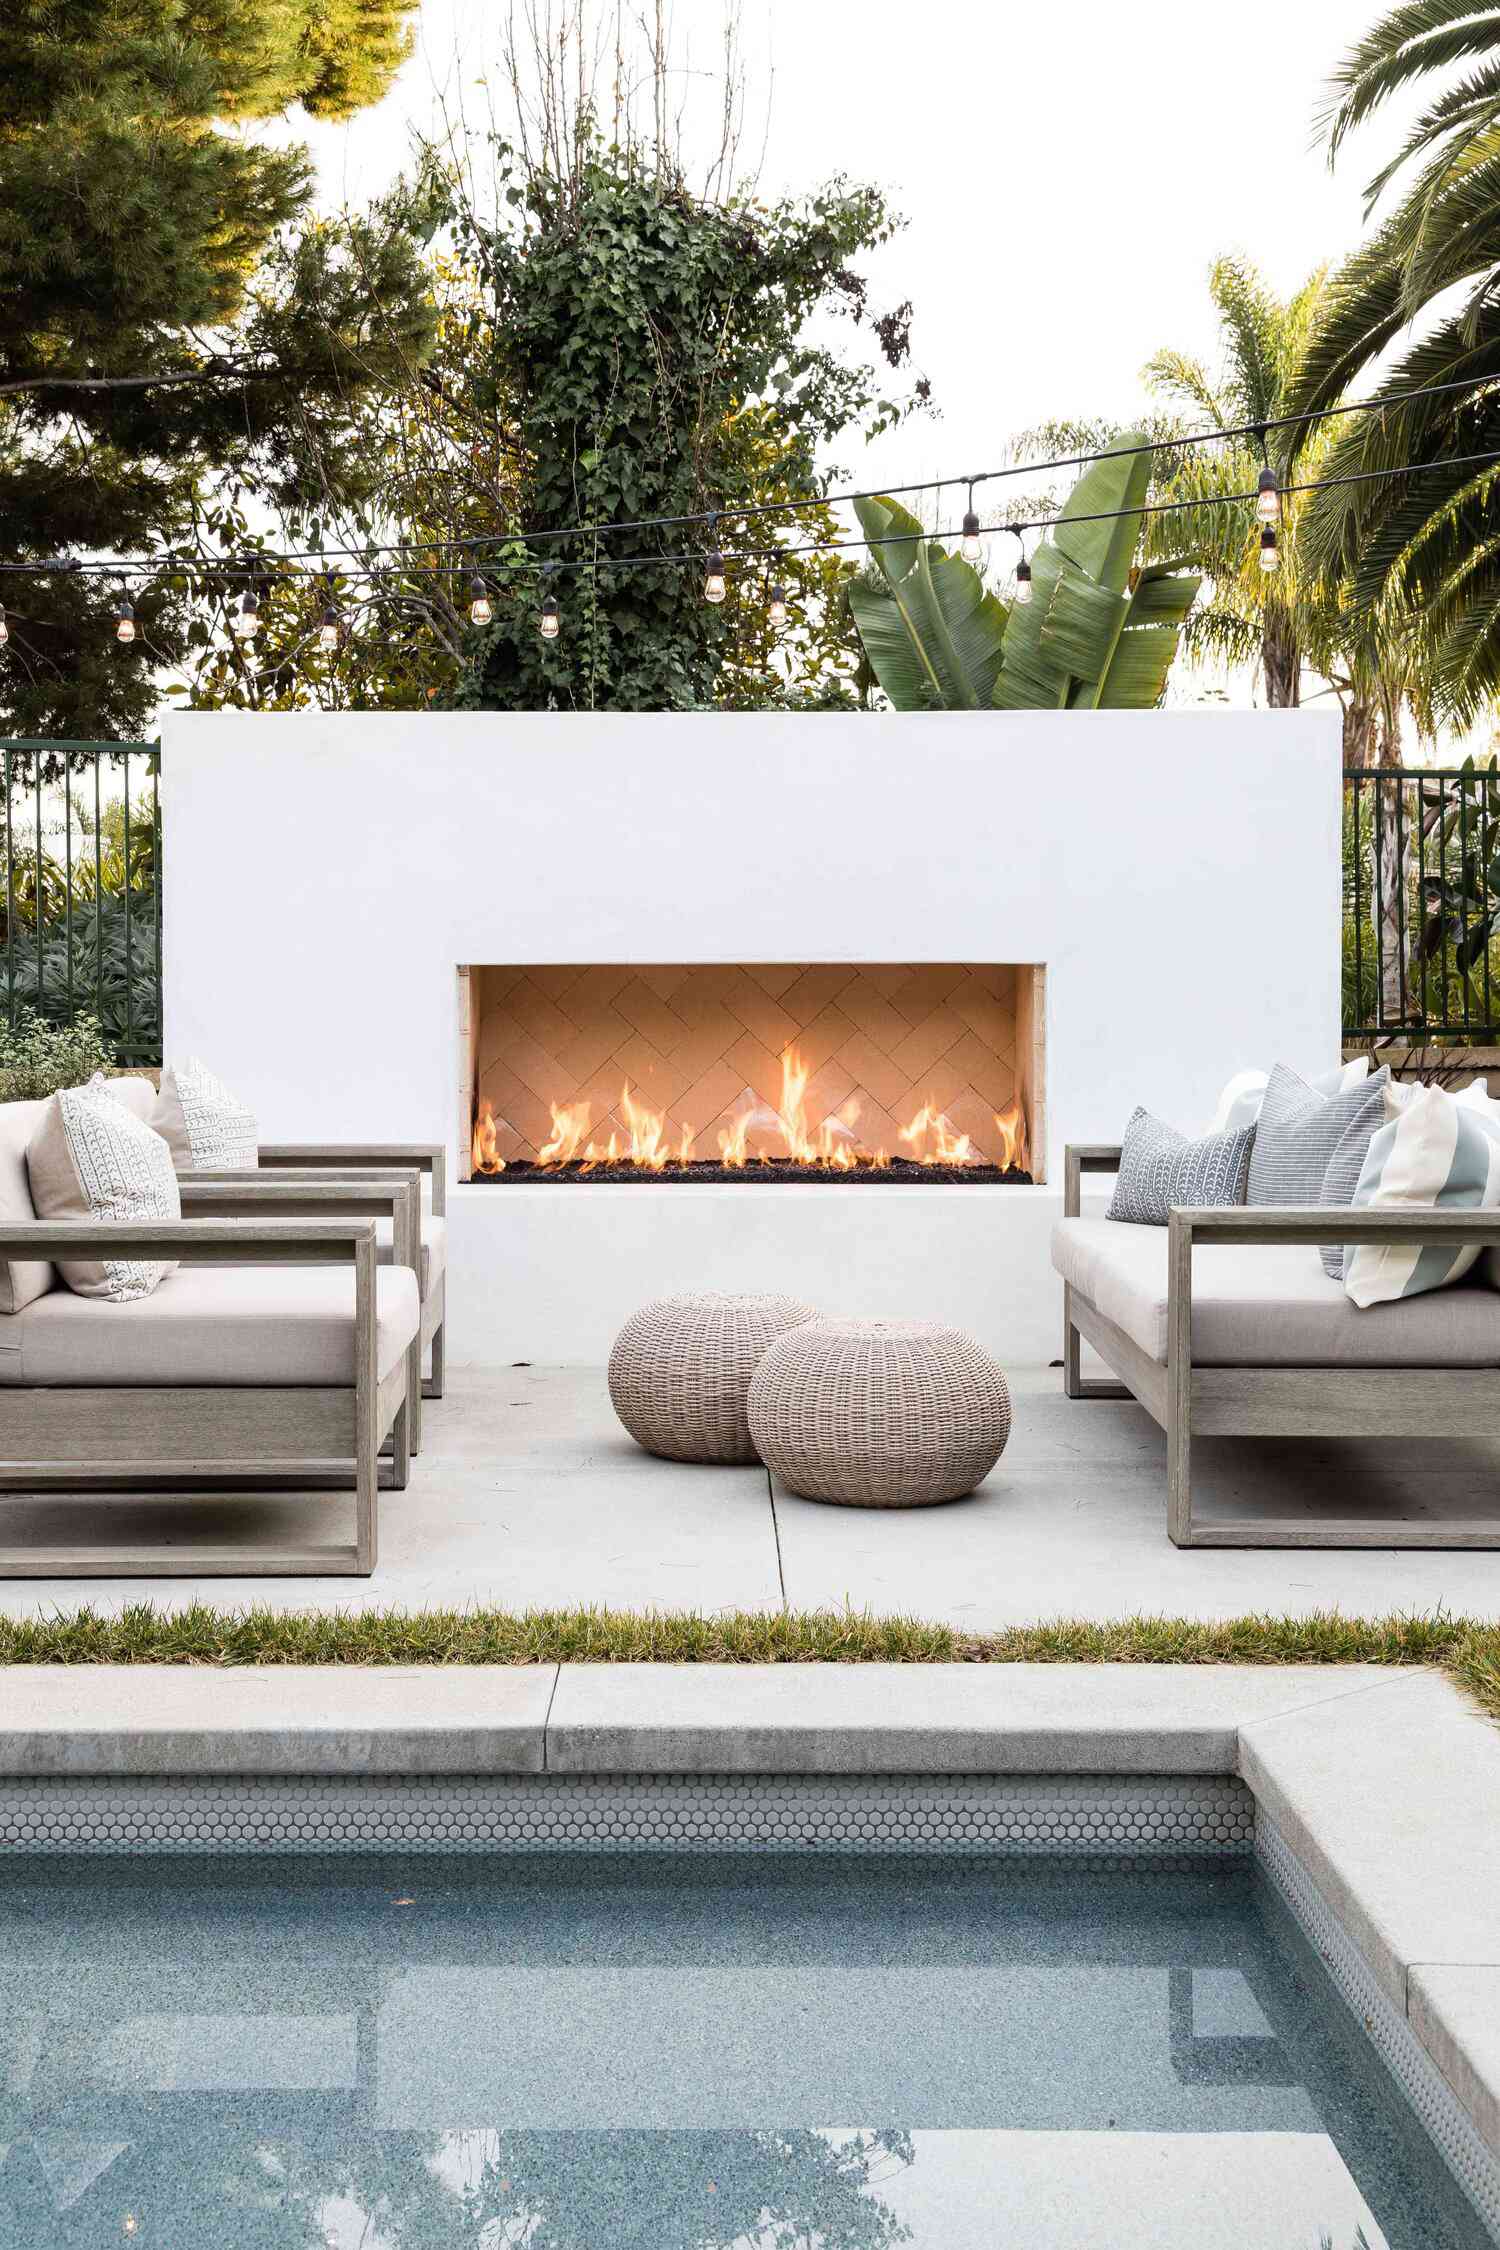 A backyard patio with cozy seating, a pool, an outdoor fireplace, and string lights